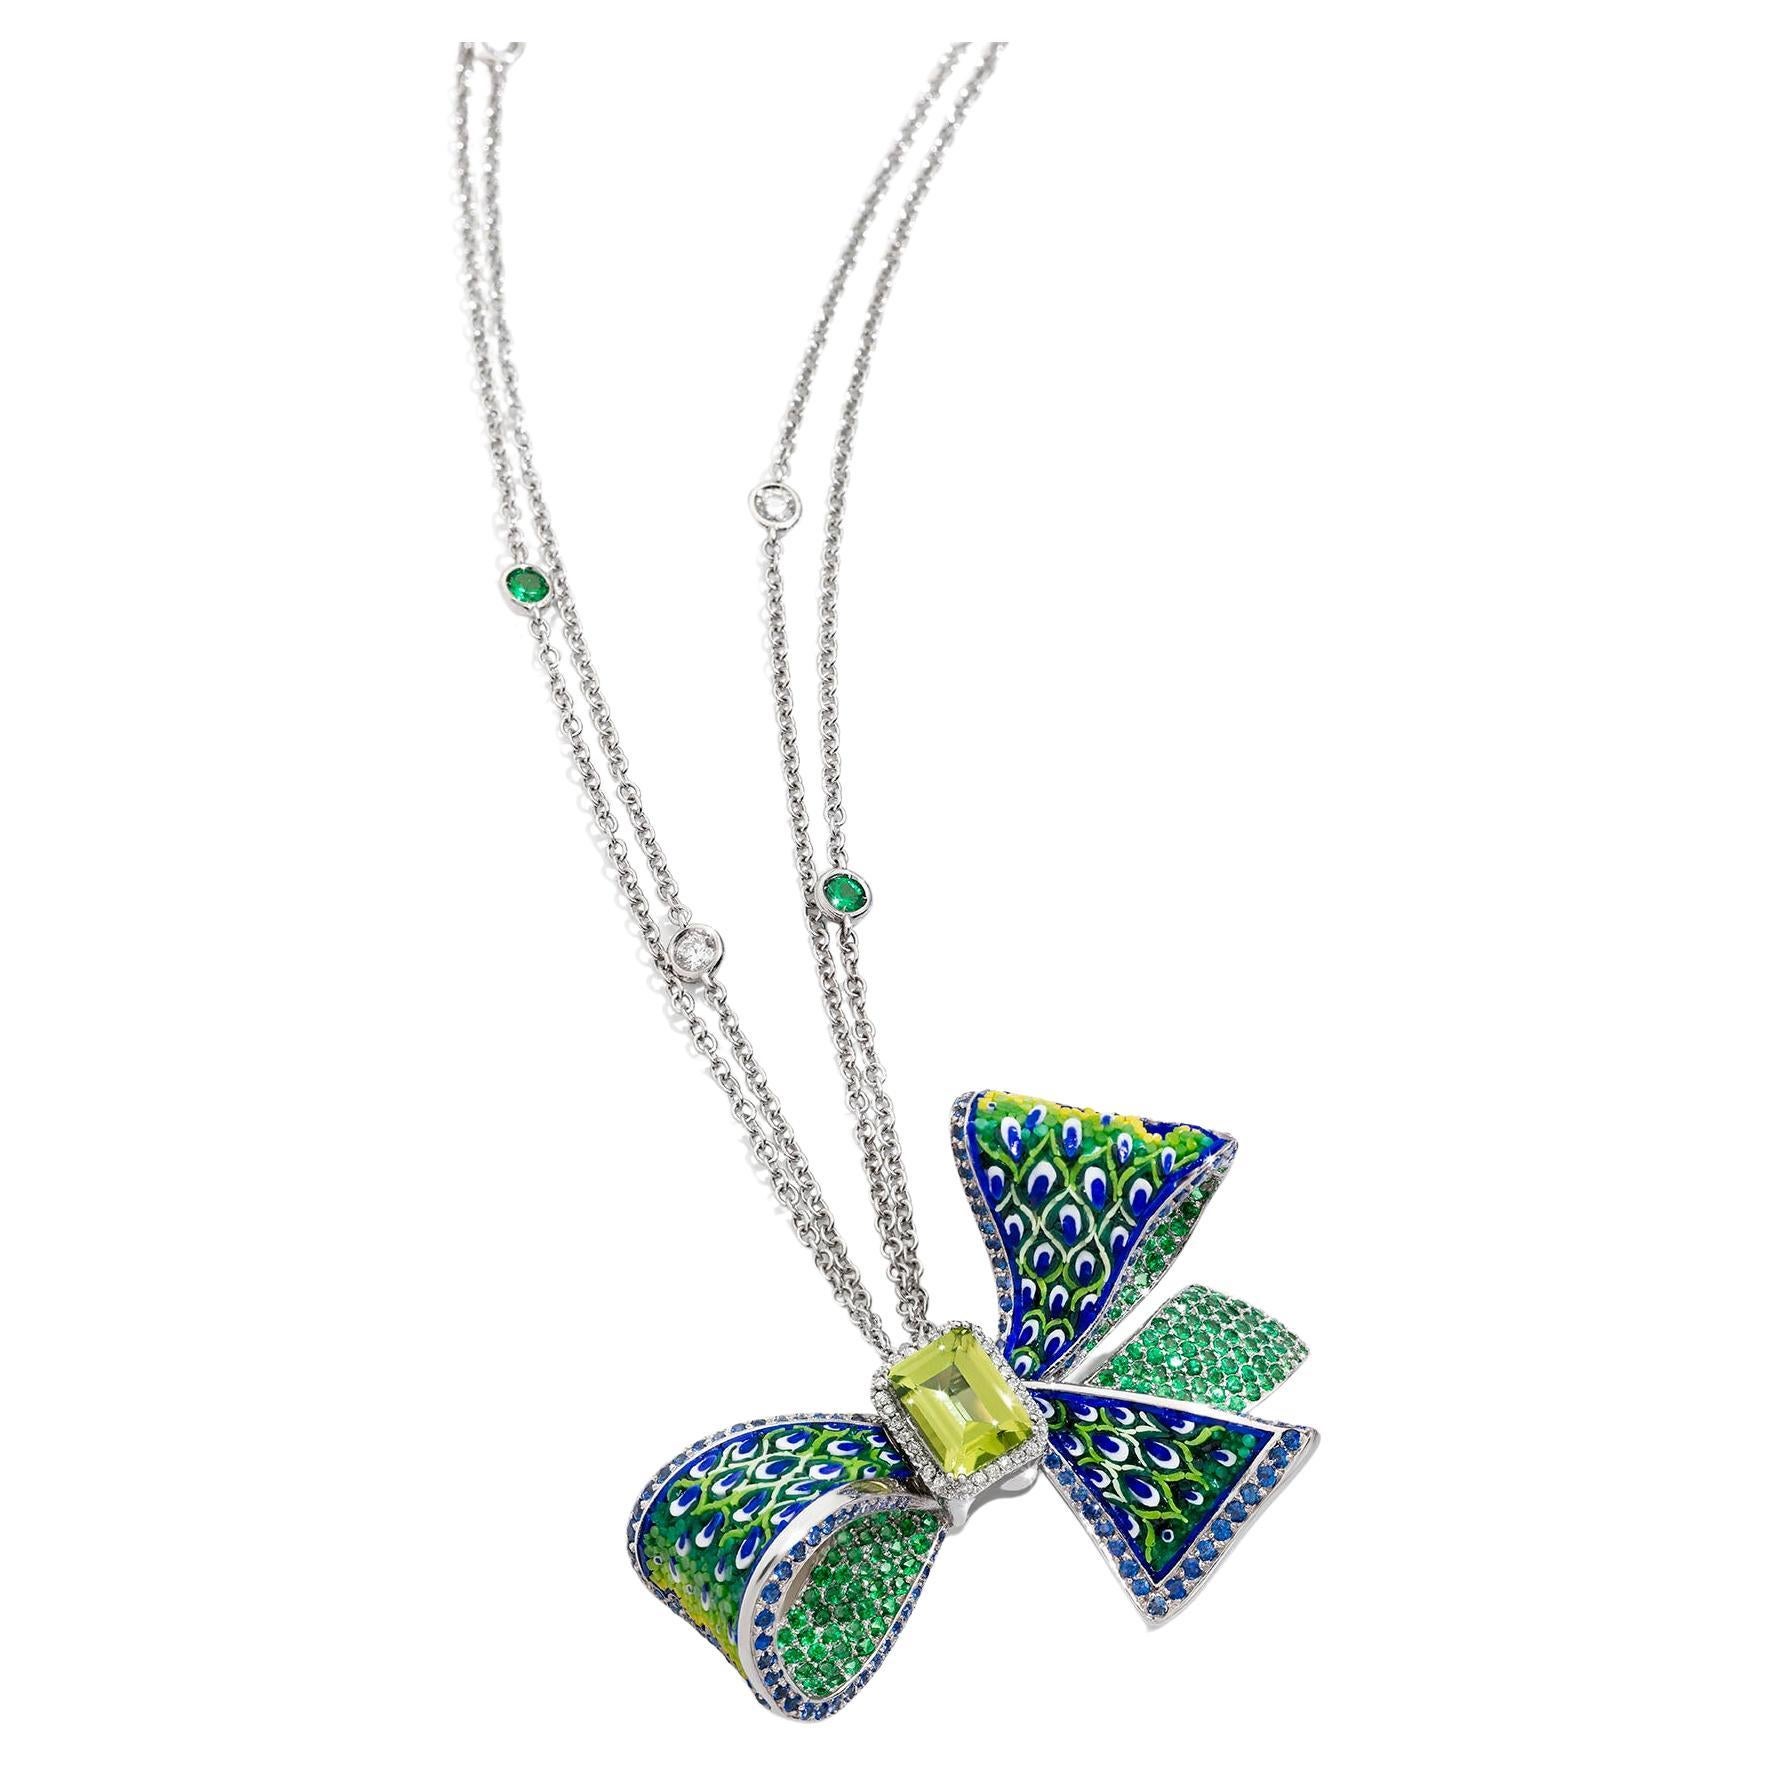 Green Ribbon Necklace White Gold White Diamonds Peridote Decorated Micromosaic  For Sale